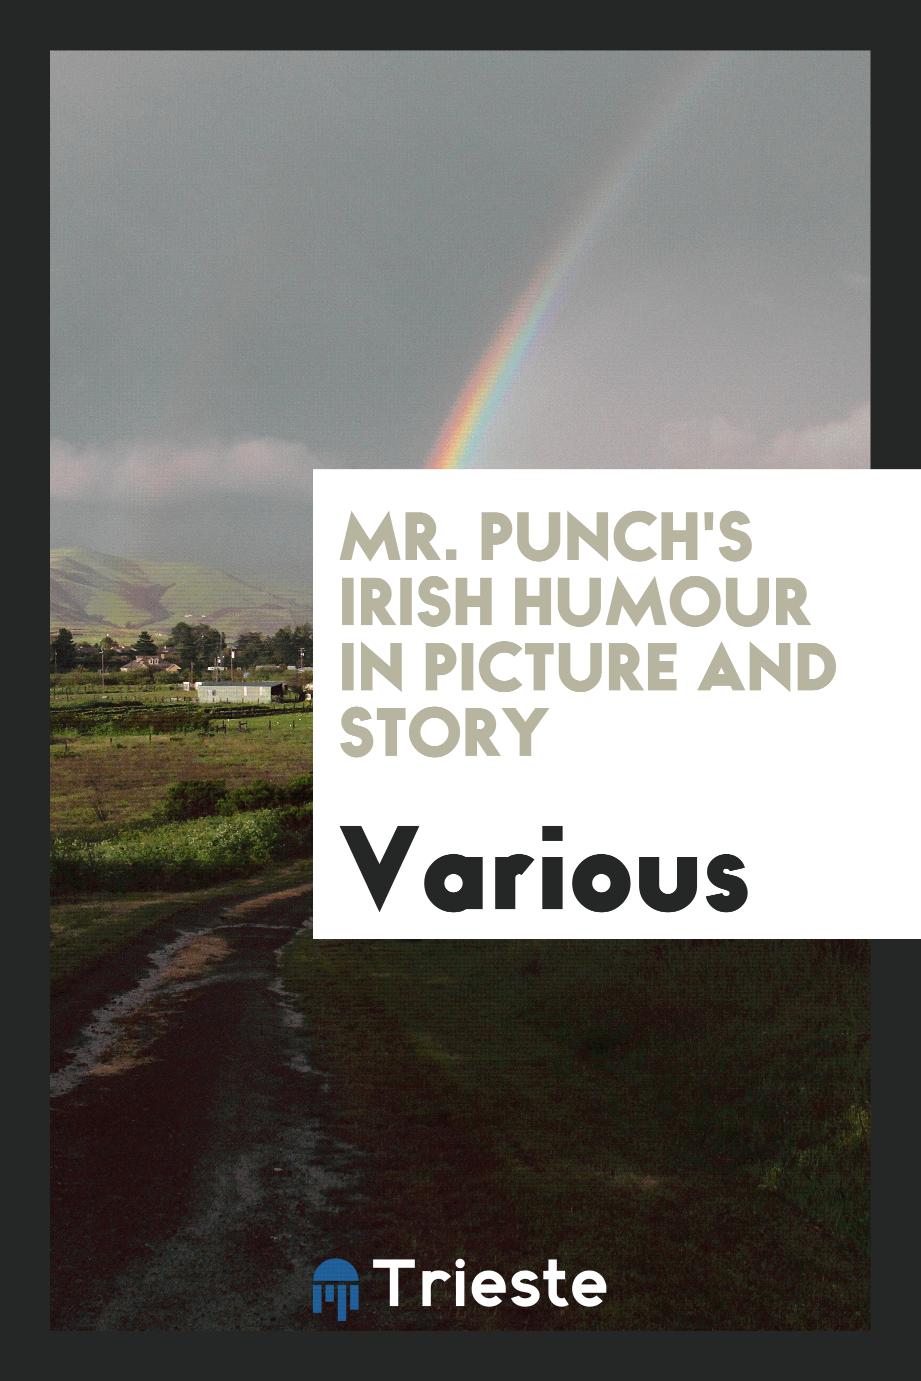 Mr. Punch's Irish humour in picture and story